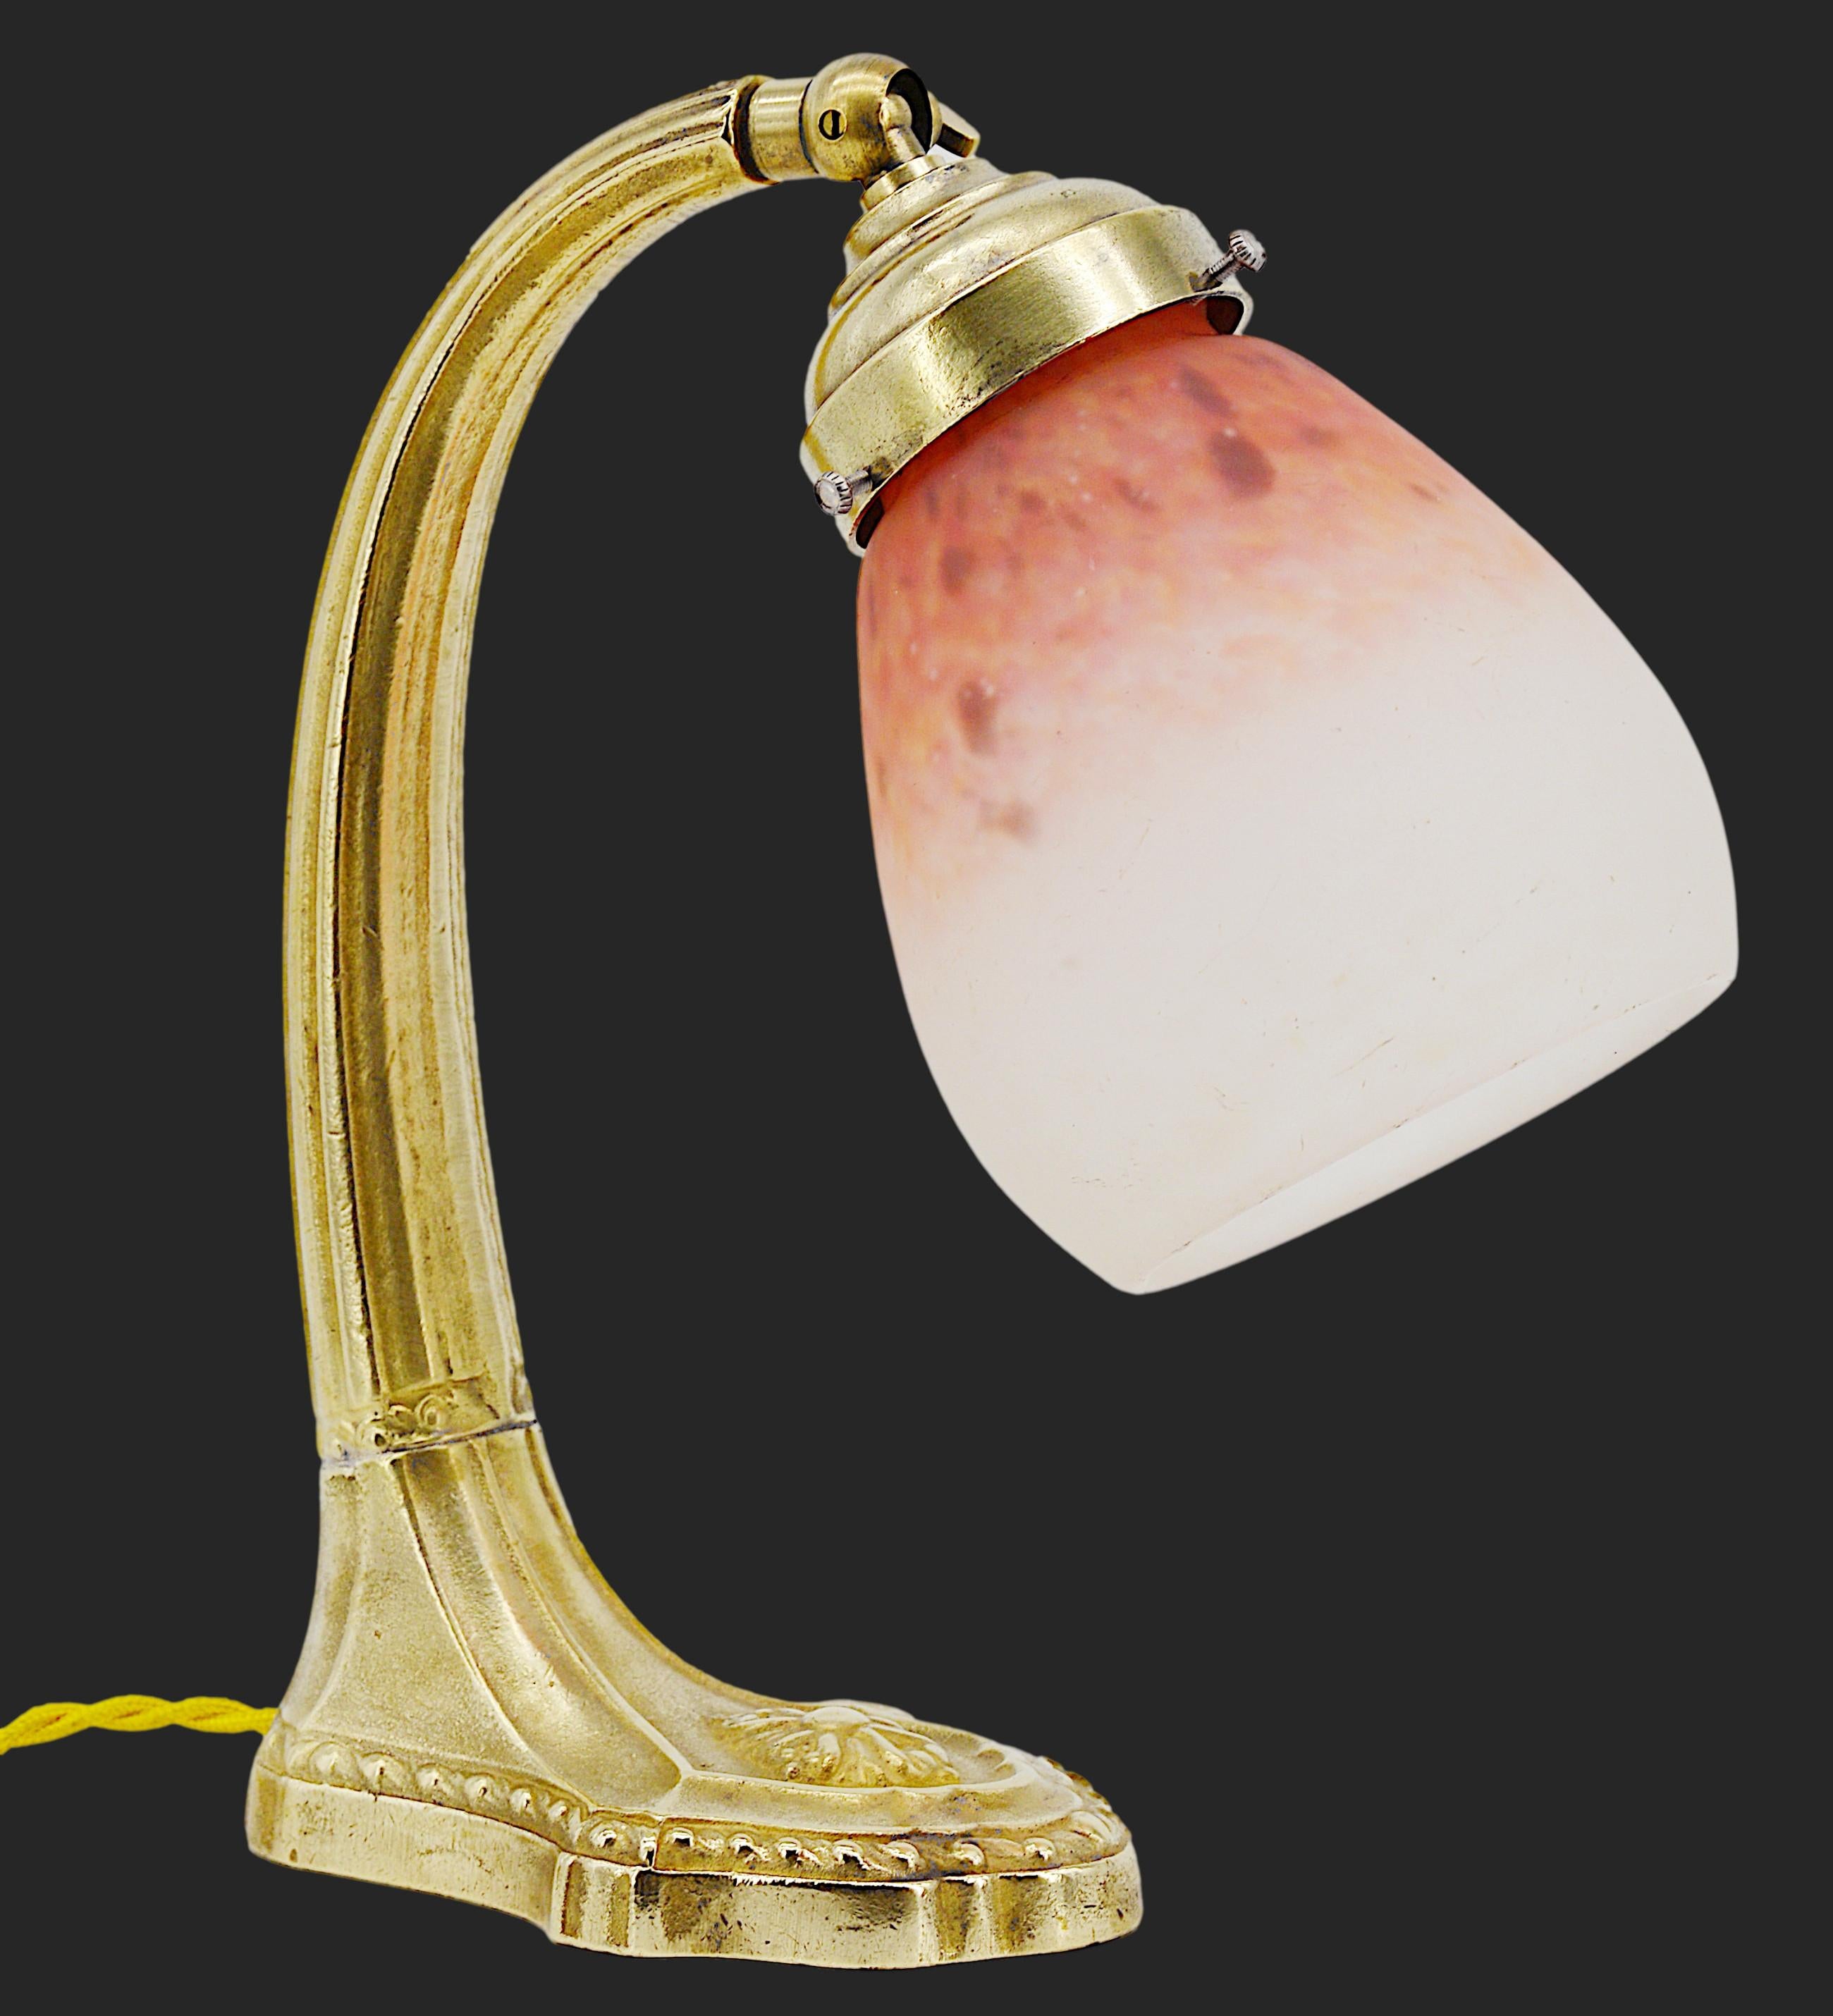 French Art Deco swiveling desk / table lamp by Charles Schneider (Epinay-sur-Seine, Paris), France, ca.1925. This blown molded glass shade made by Charles Schneider comes on its classy solid bronze base. The glass shade was made of blown double